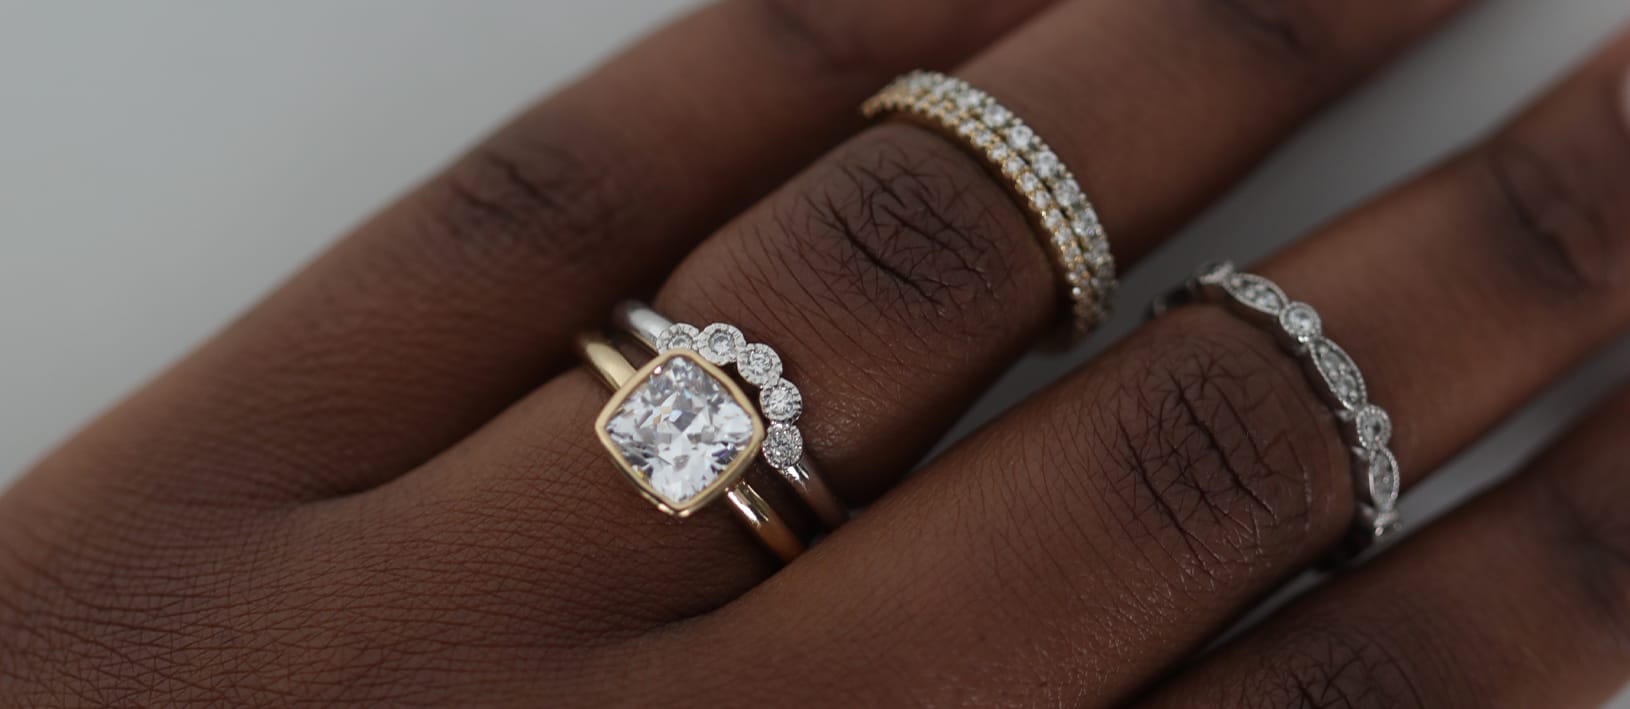 An engagement ring and wedding band